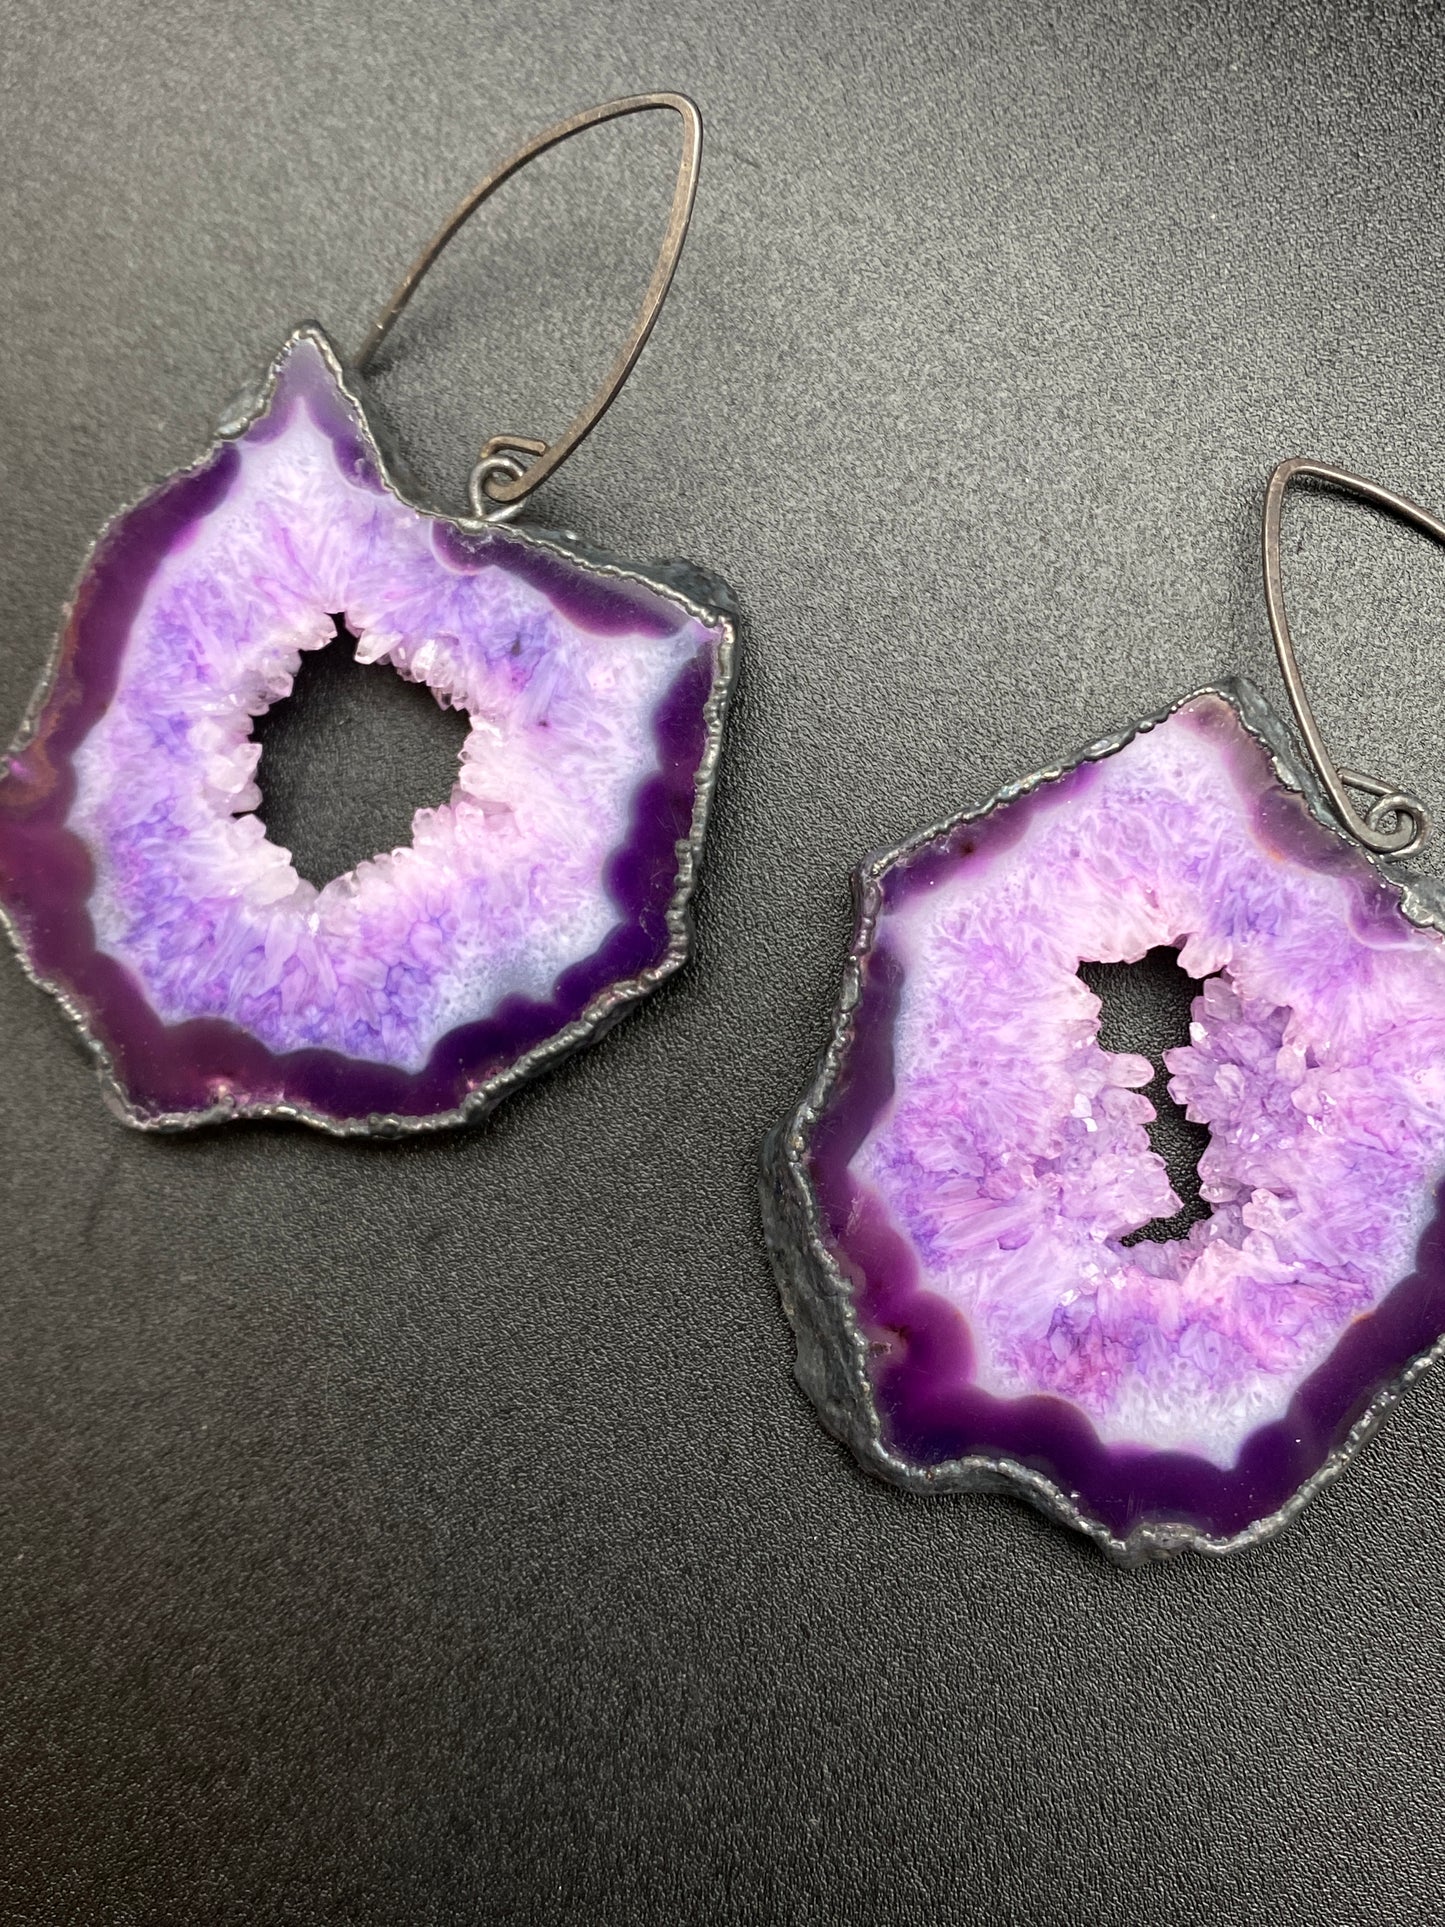 Openings ~ Agate Geode Slice Earrings Oxidized Silver Wires ~ Your Choice